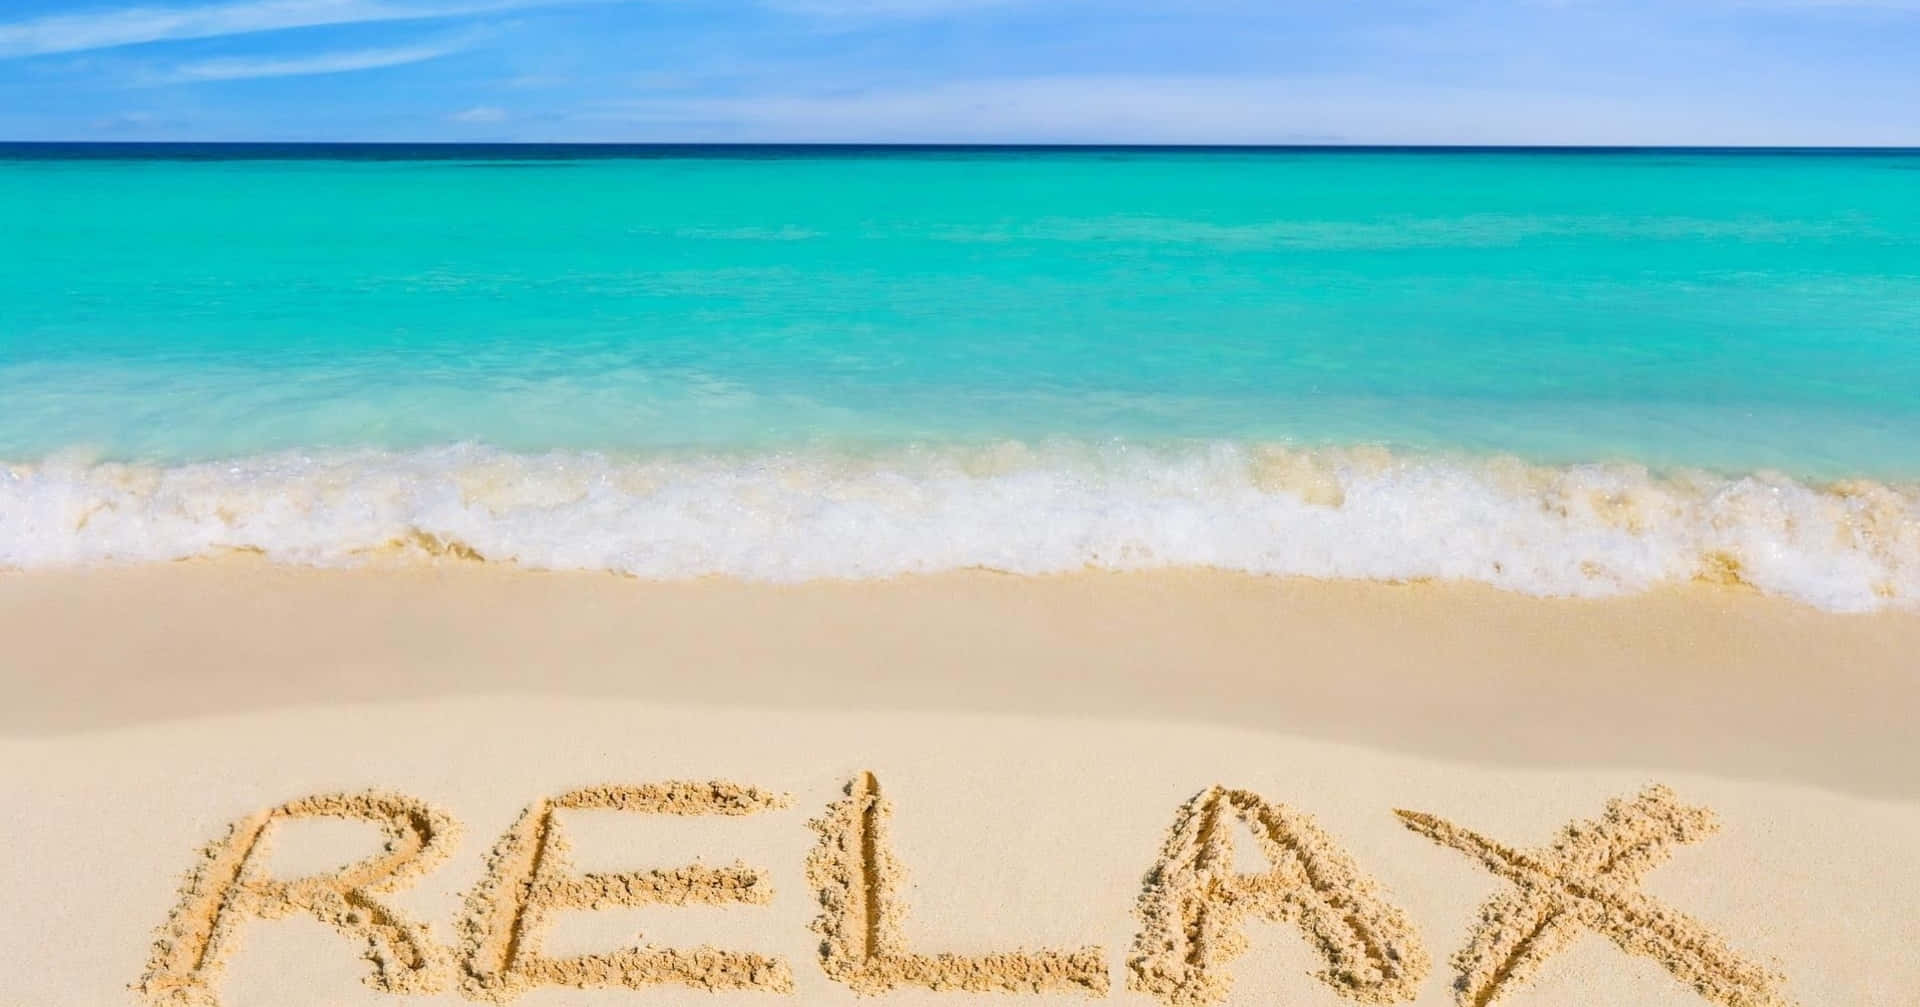 Cool Summer Relax Word On The Sand Wallpaper